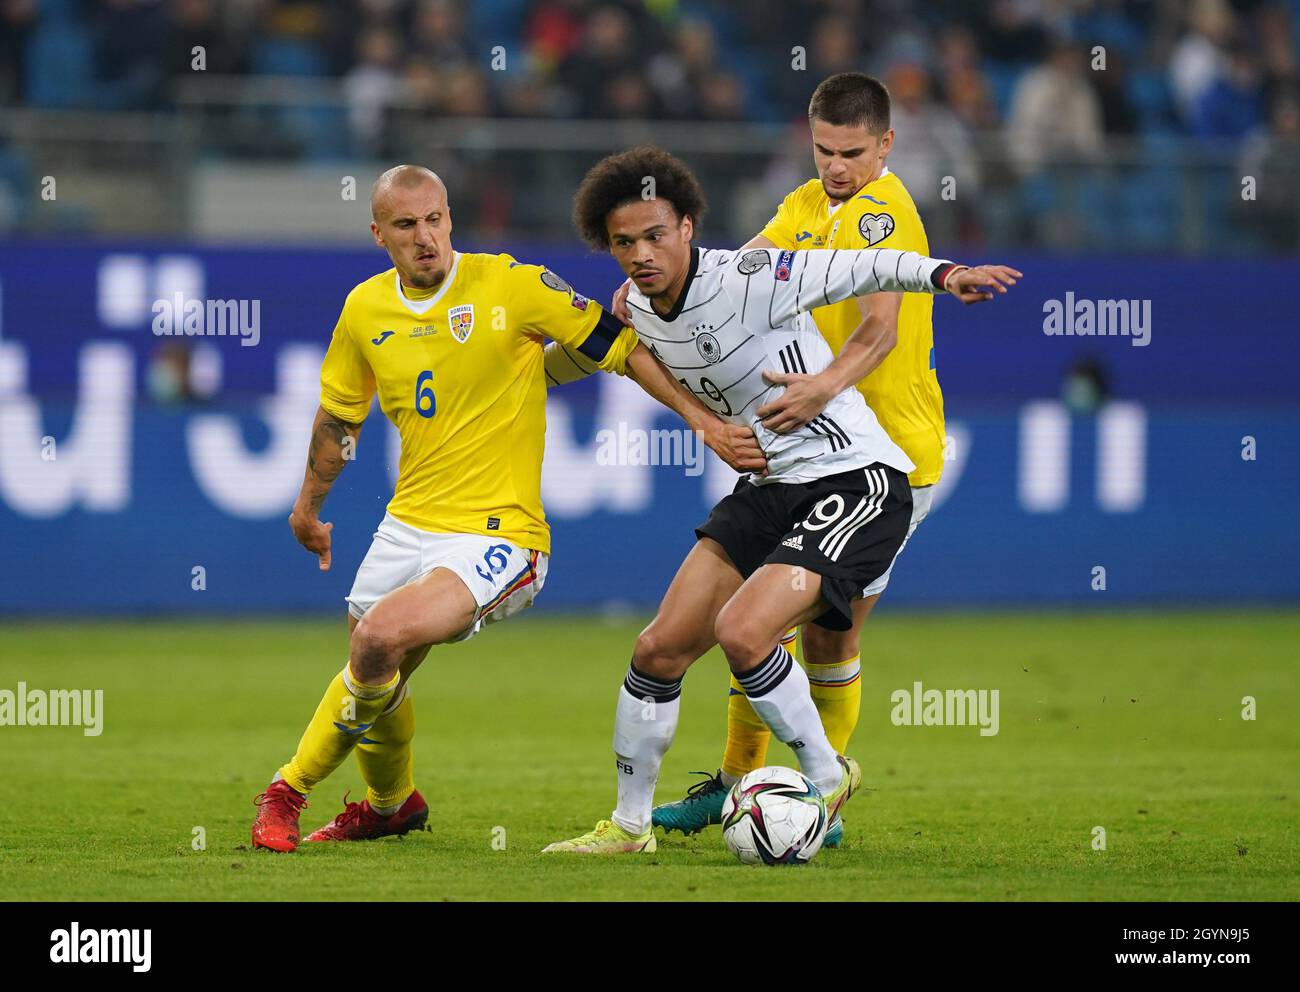 Hamburg, Germany. 08th Oct, 2021. Football: World Cup Qualification Europe, Germany - Romania, Group Stage, Group J, Matchday 7 at Volksparkstadion. Germany's Leroy Sane (M) fights for the ball with Romania's Vlad Chiriches (l) and Romania's Razvan Marin. Credit: Marcus Brandt/dpa/Alamy Live News Stock Photo